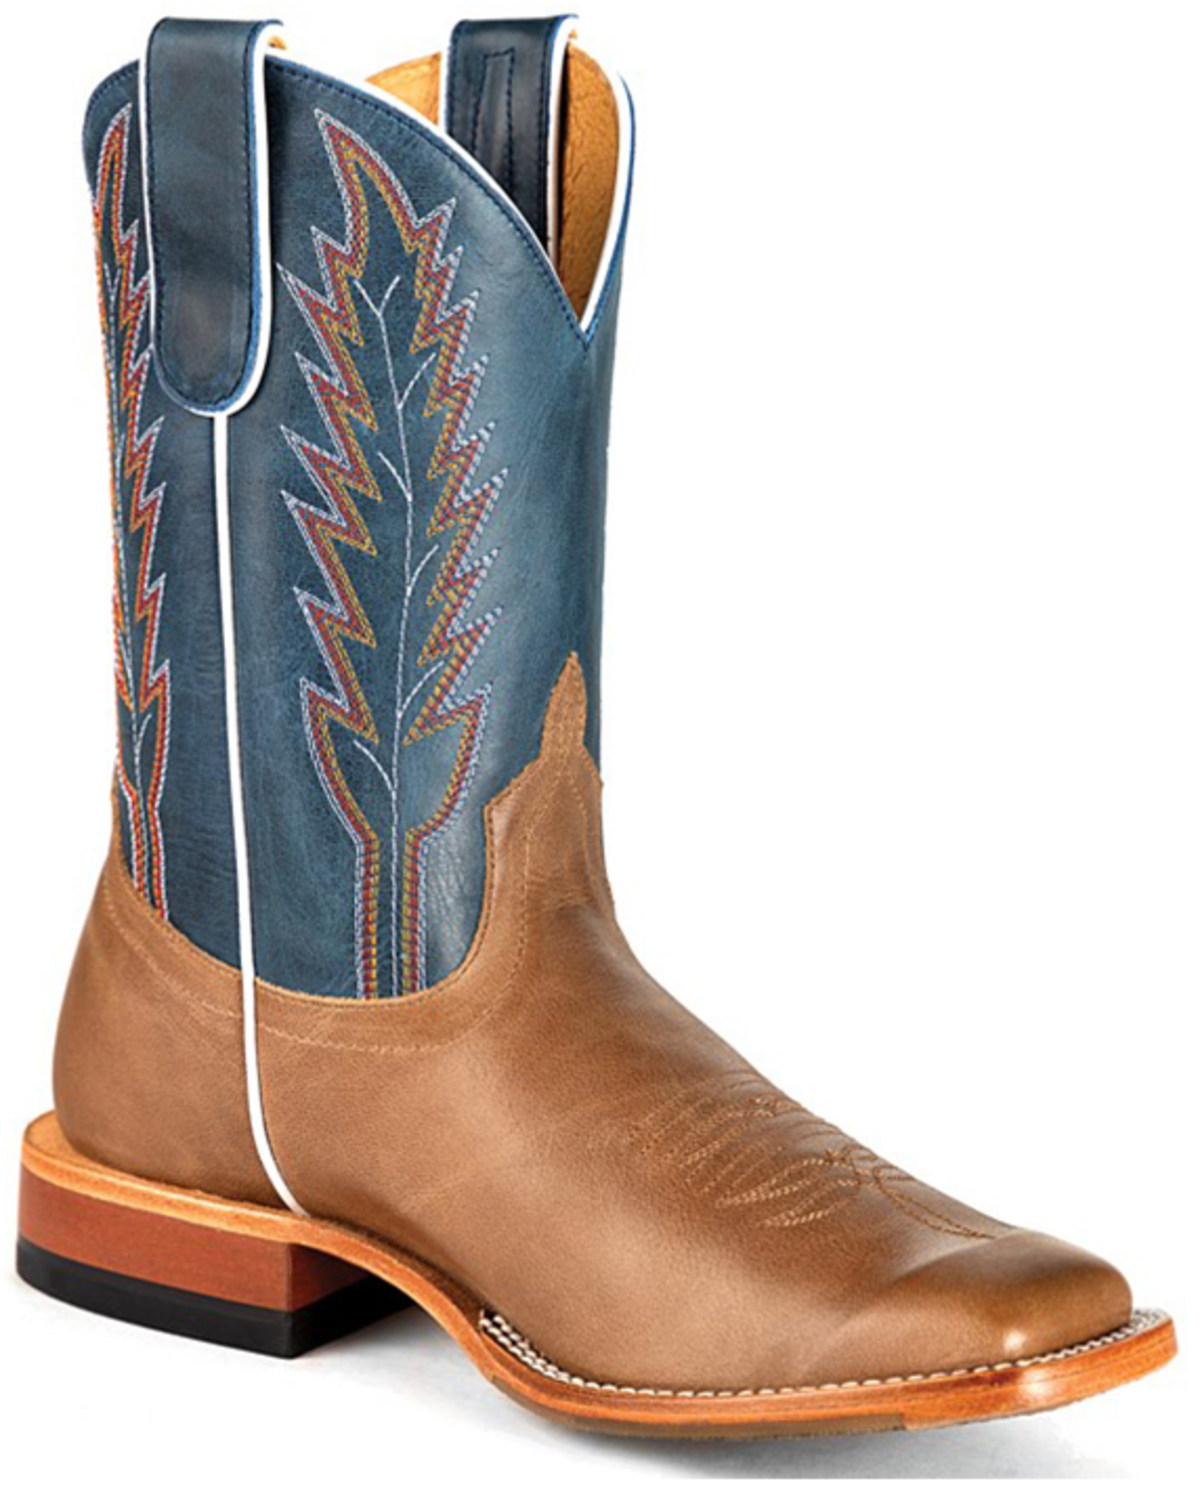 Macie Bean Women's A Square Deal Western Boots - Broad Toe